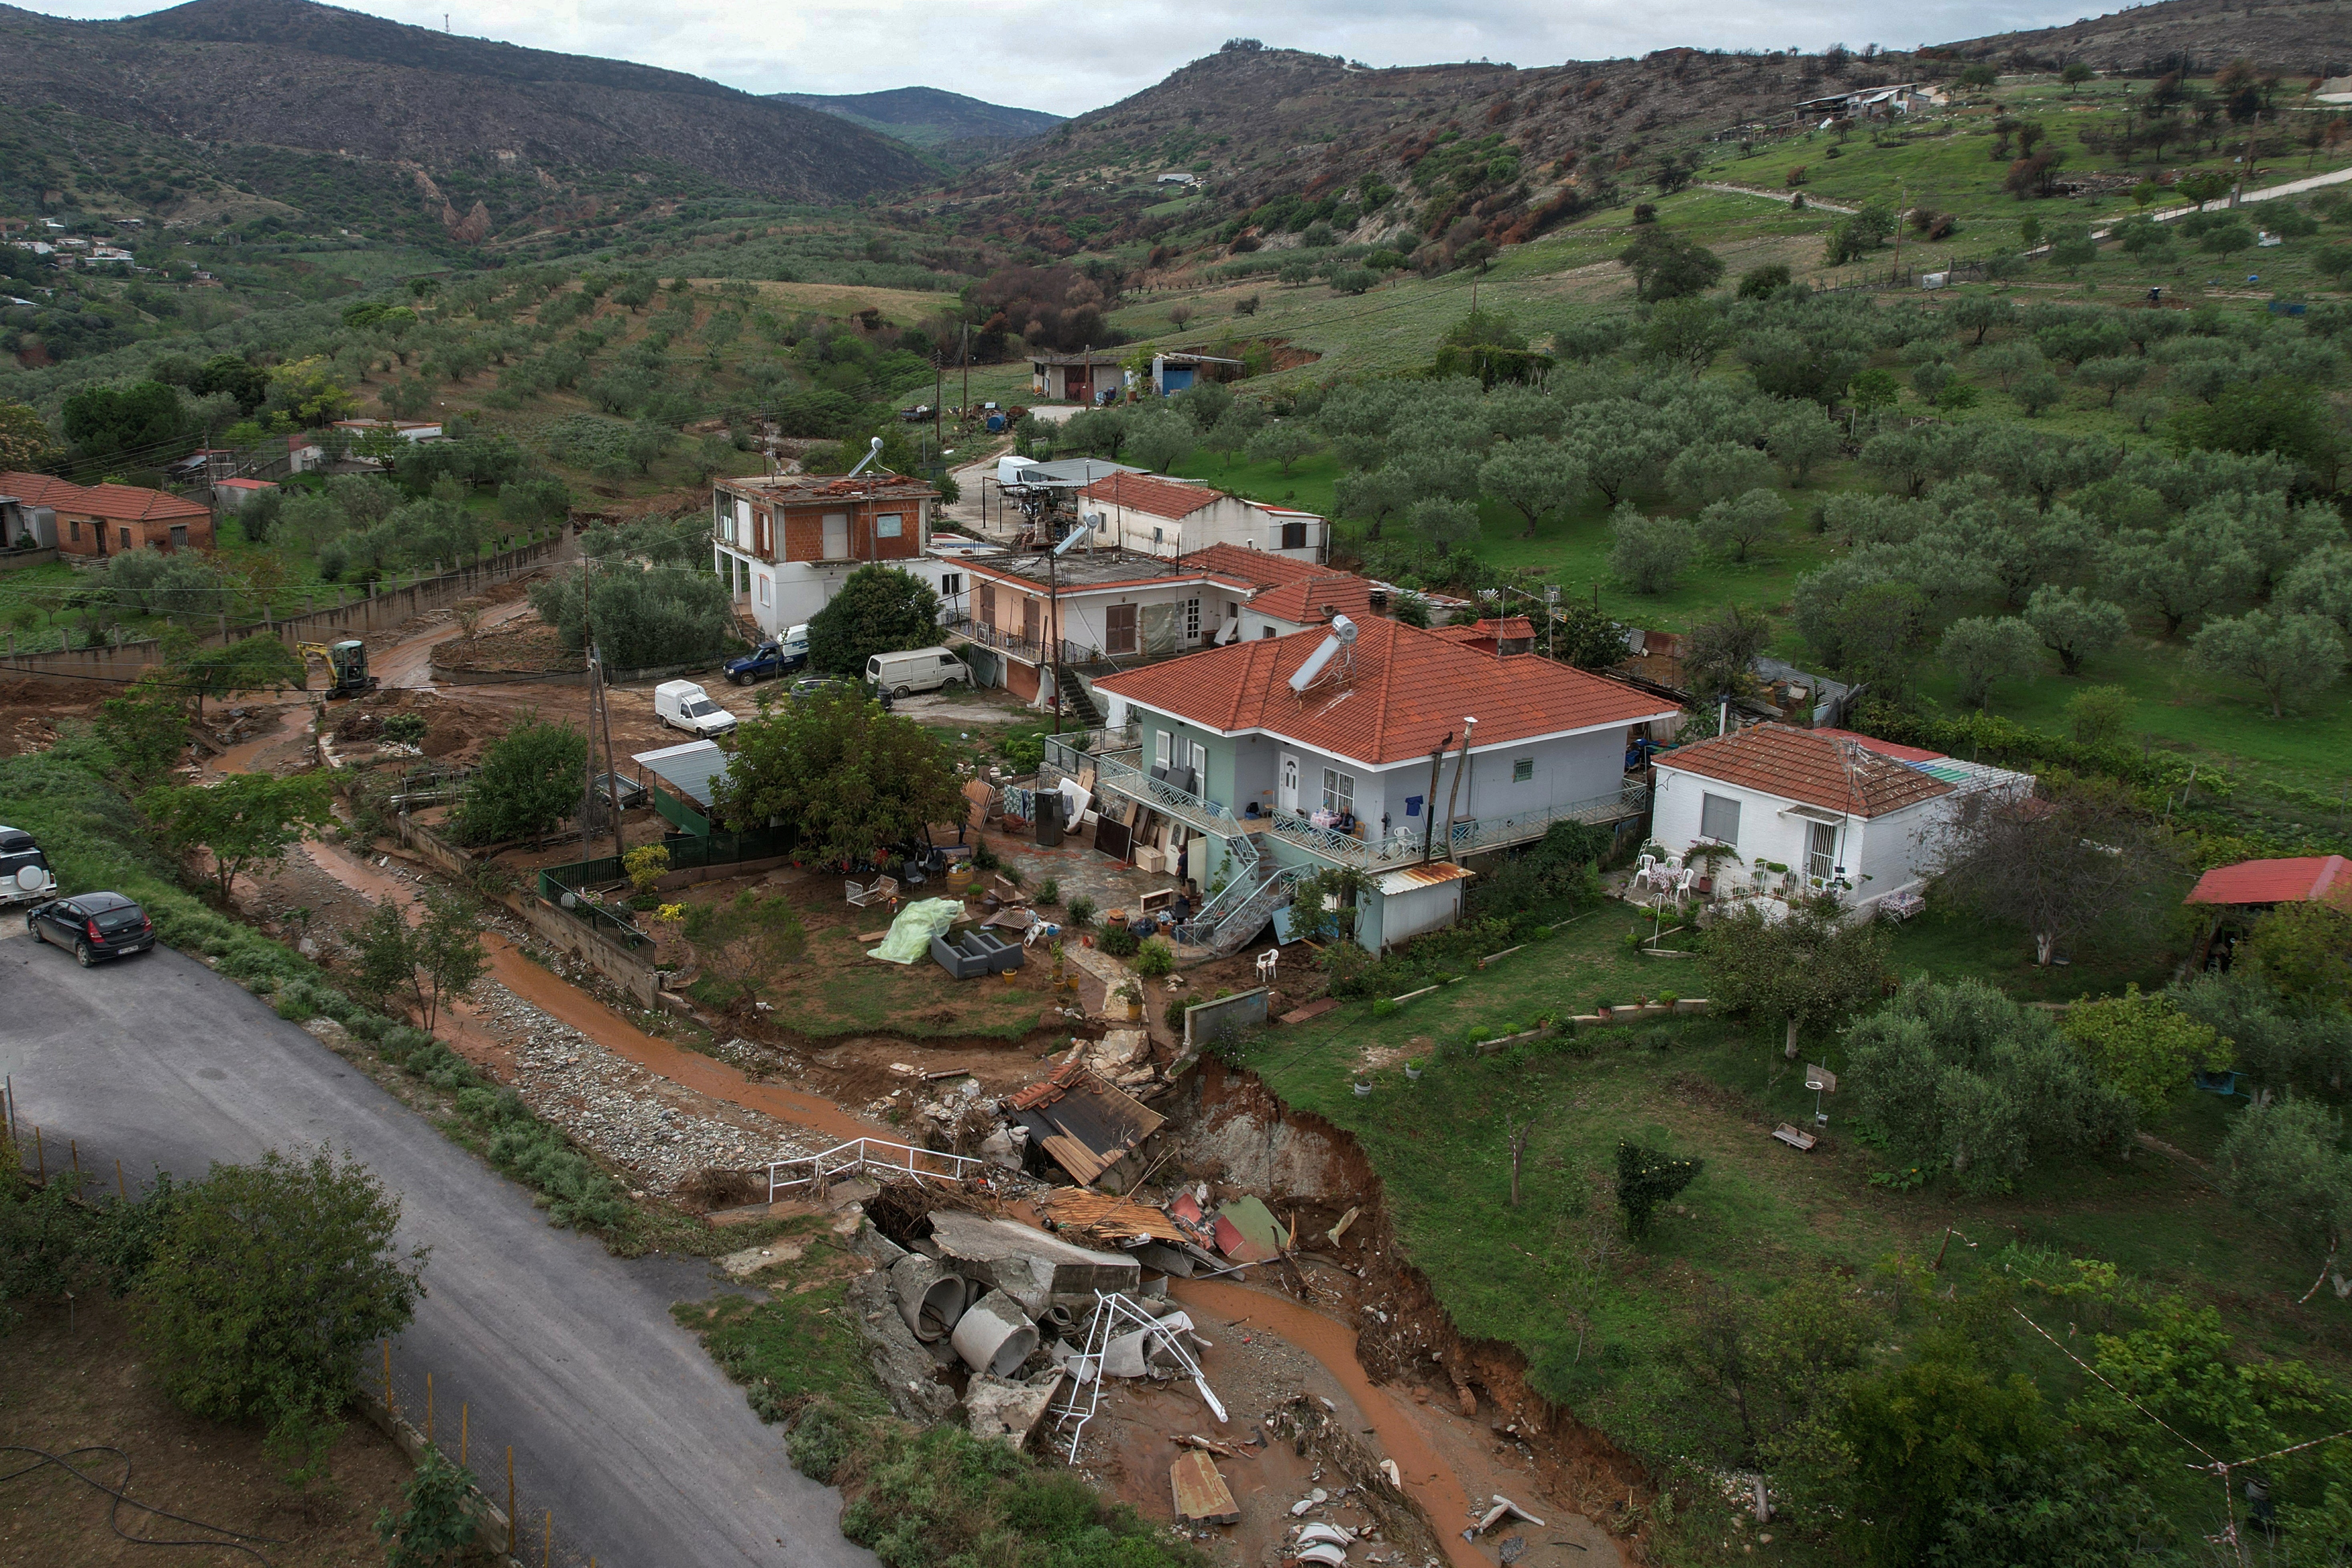 Debris is scattered in front of Vasilis Tsiamitas’s house after flooding hit Sesklo